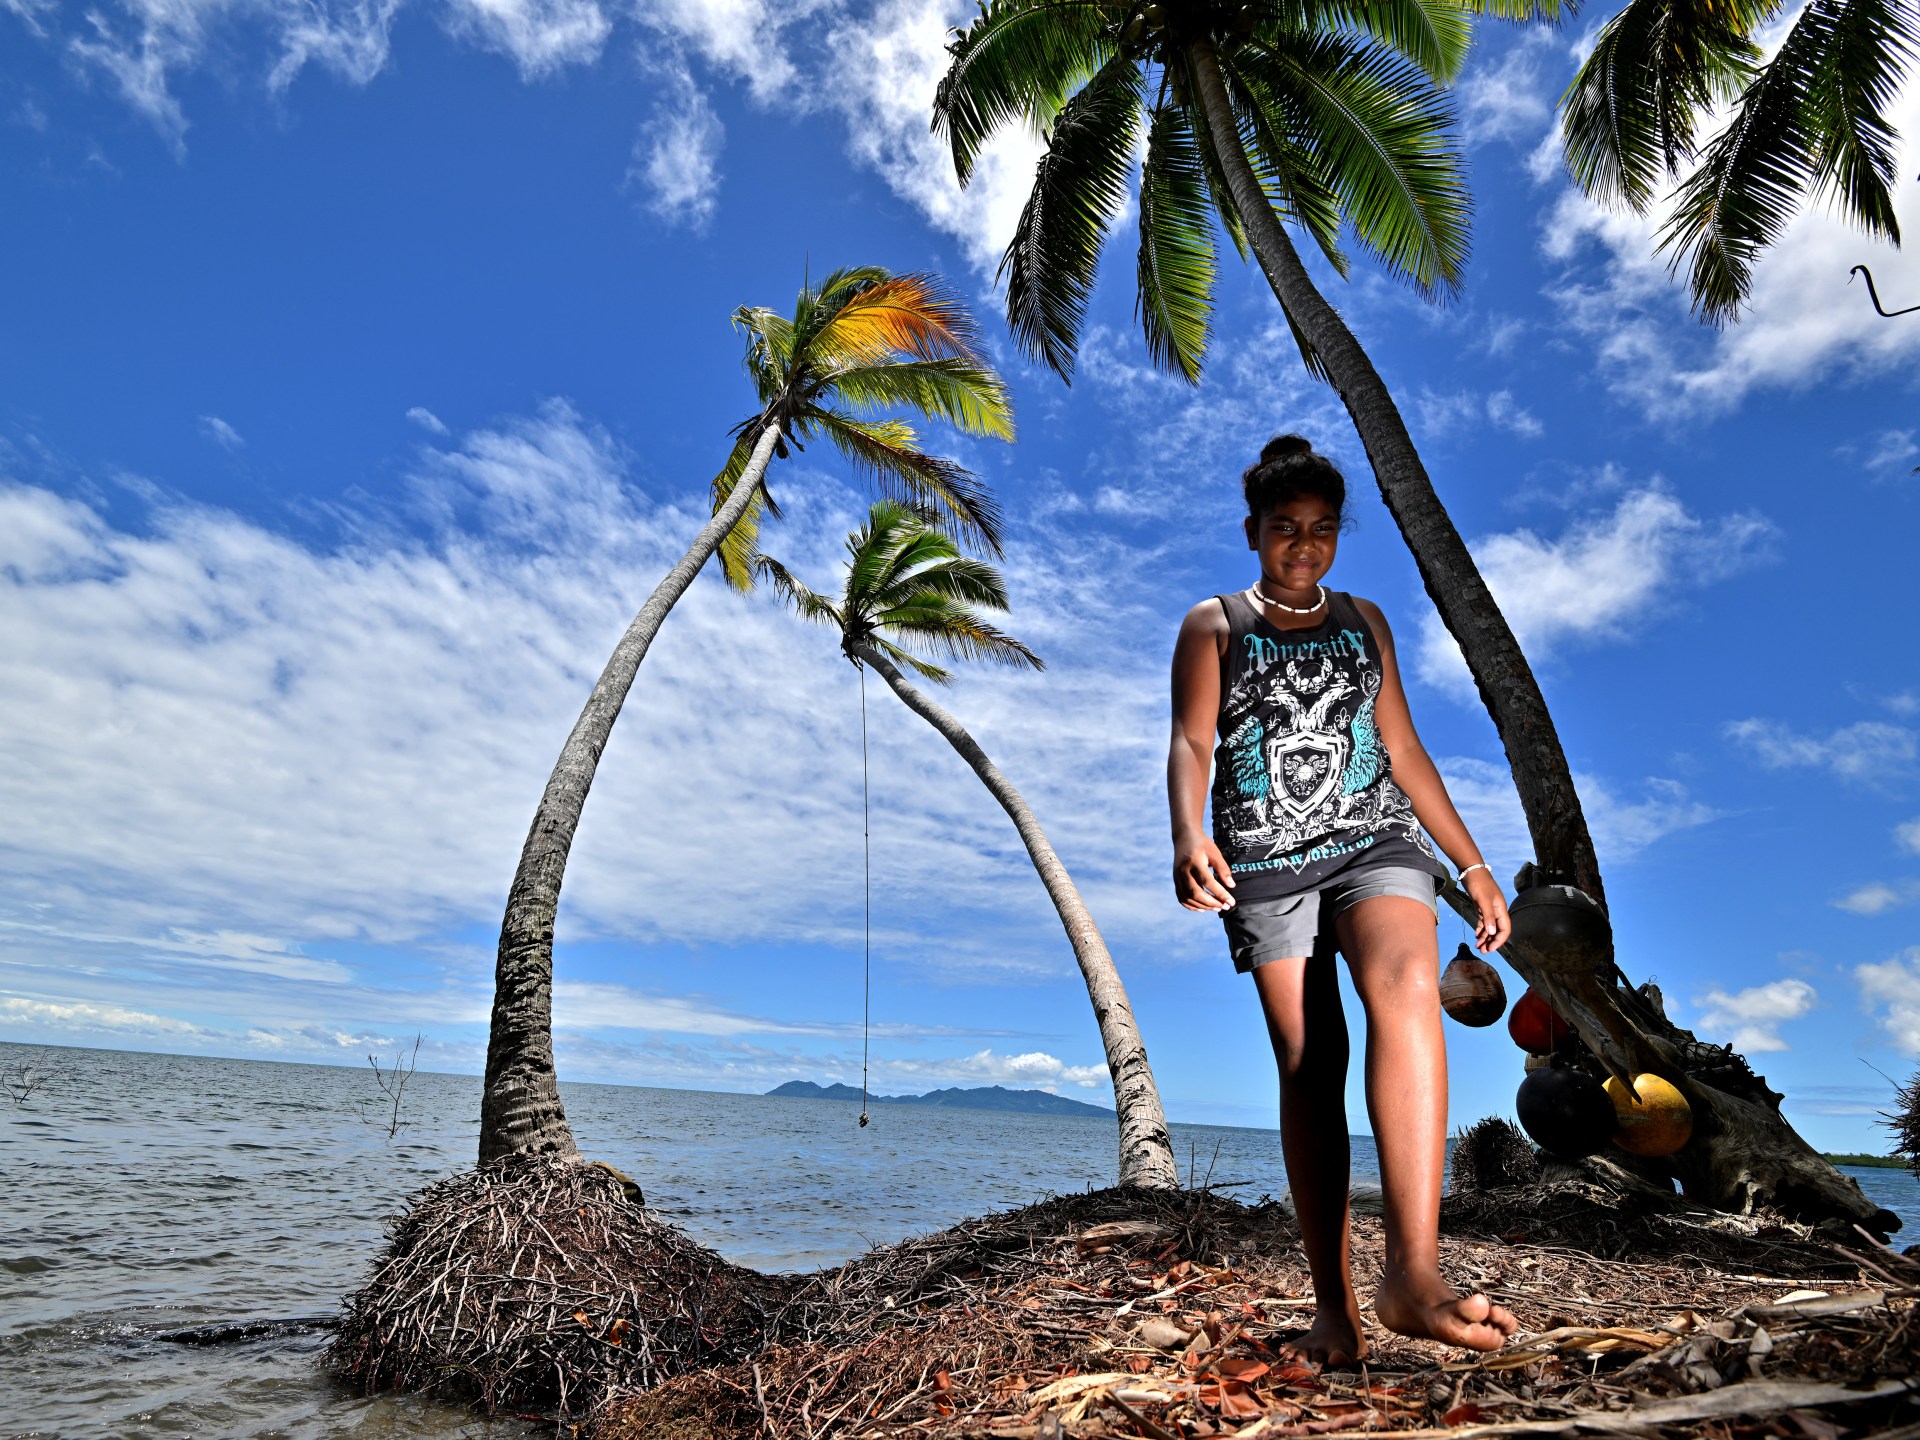 Pictures: Graves sink, fisheries shrink as local weather change hits Fiji